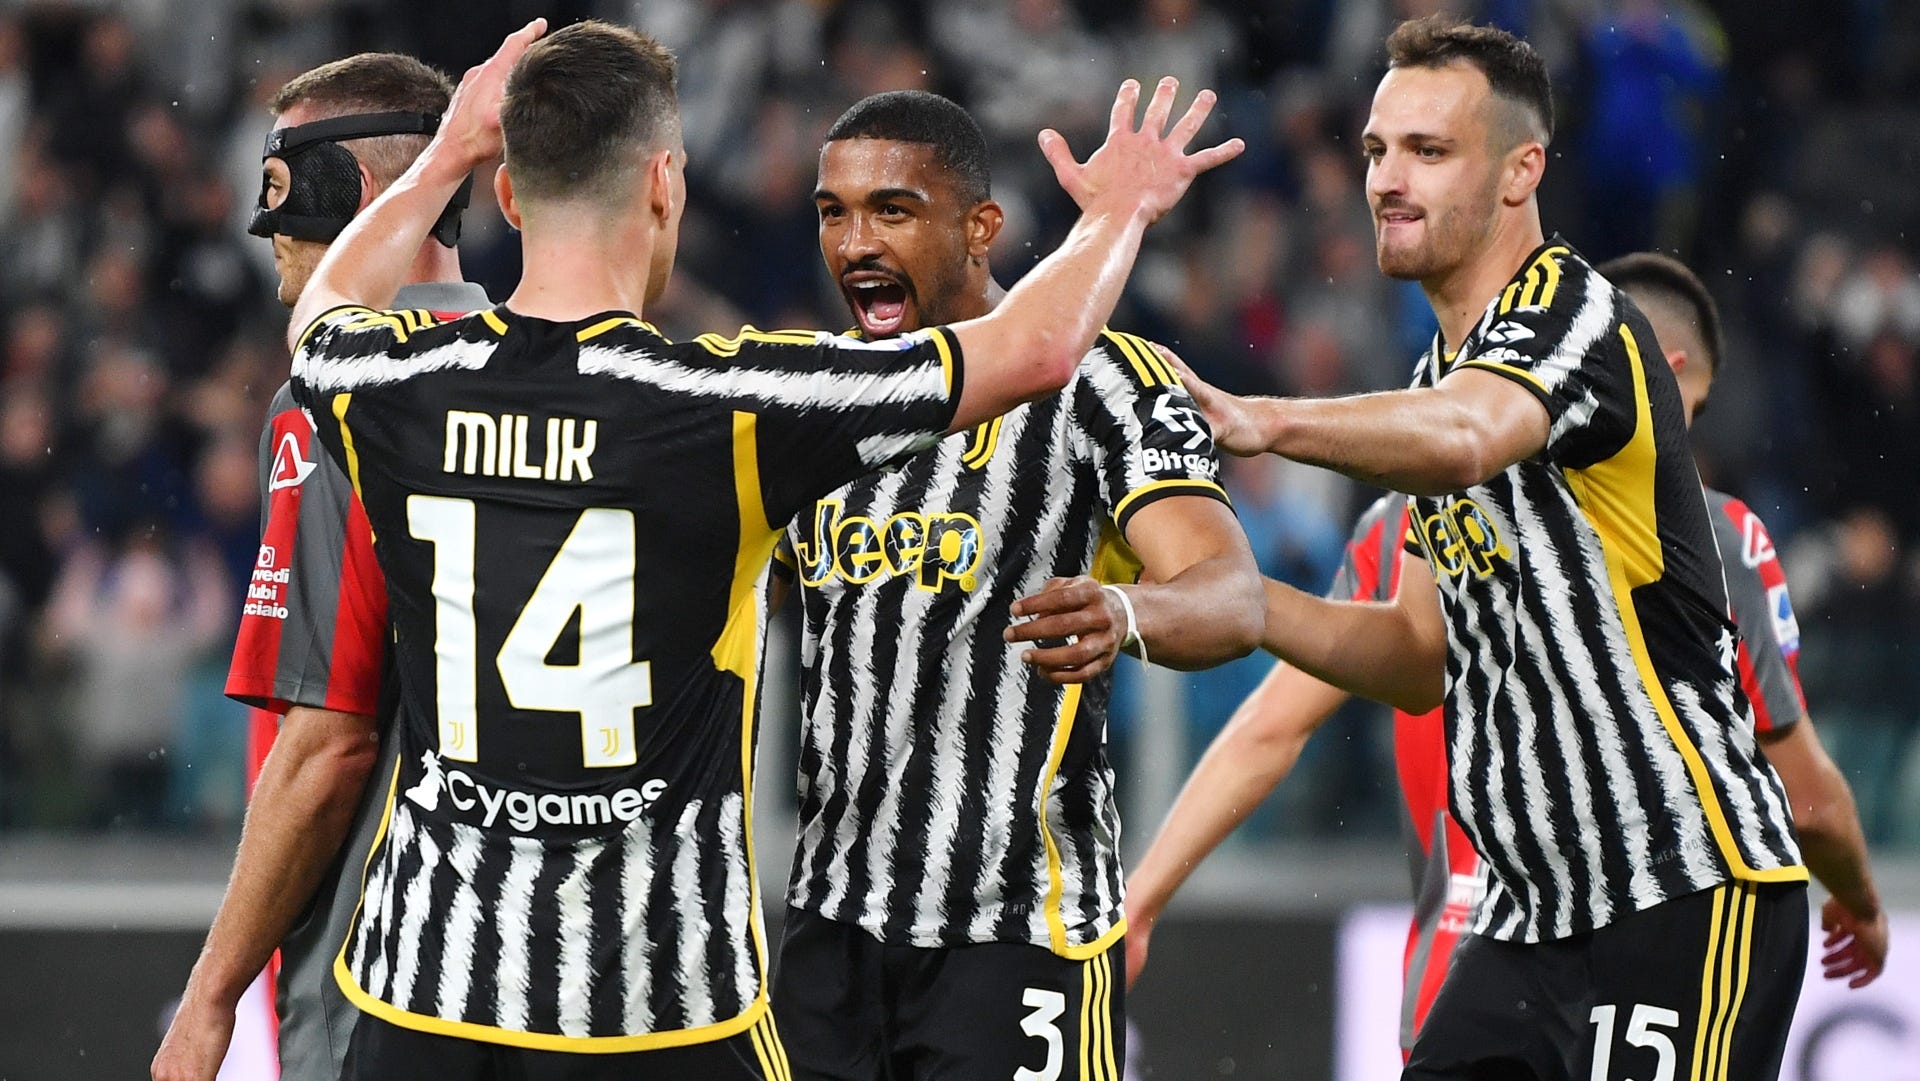 Sevilla vs Juventus Where to watch the match online, live stream, TV channels, and kick-off time Goal UK